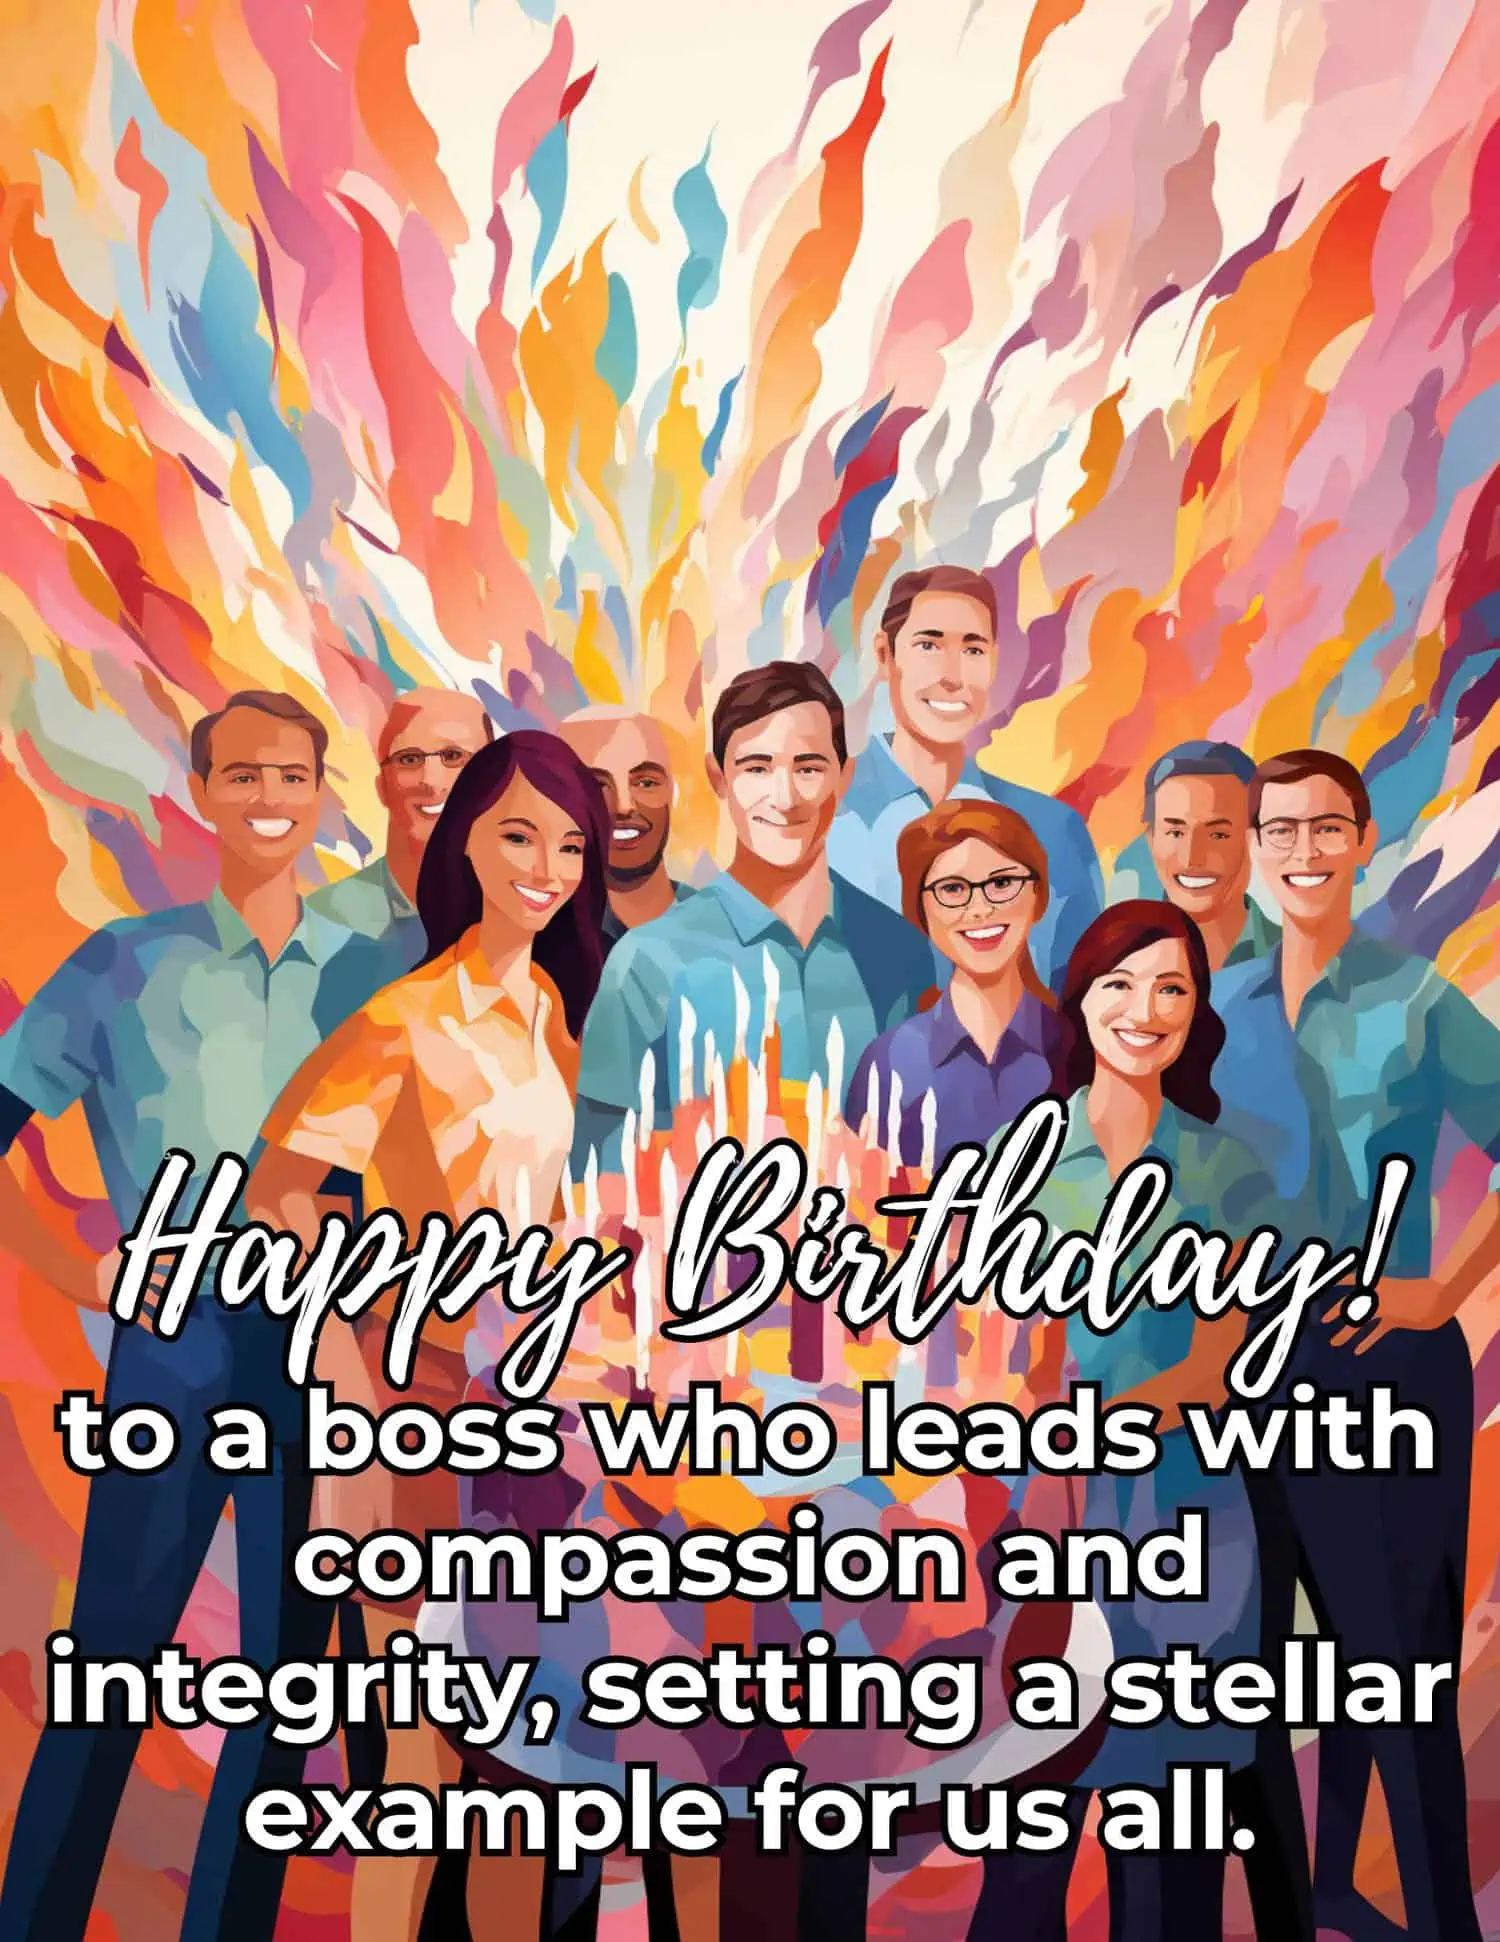 Express your heartfelt wishes and appreciation to your boss on their special day with these thoughtful and sincere birthday messages.